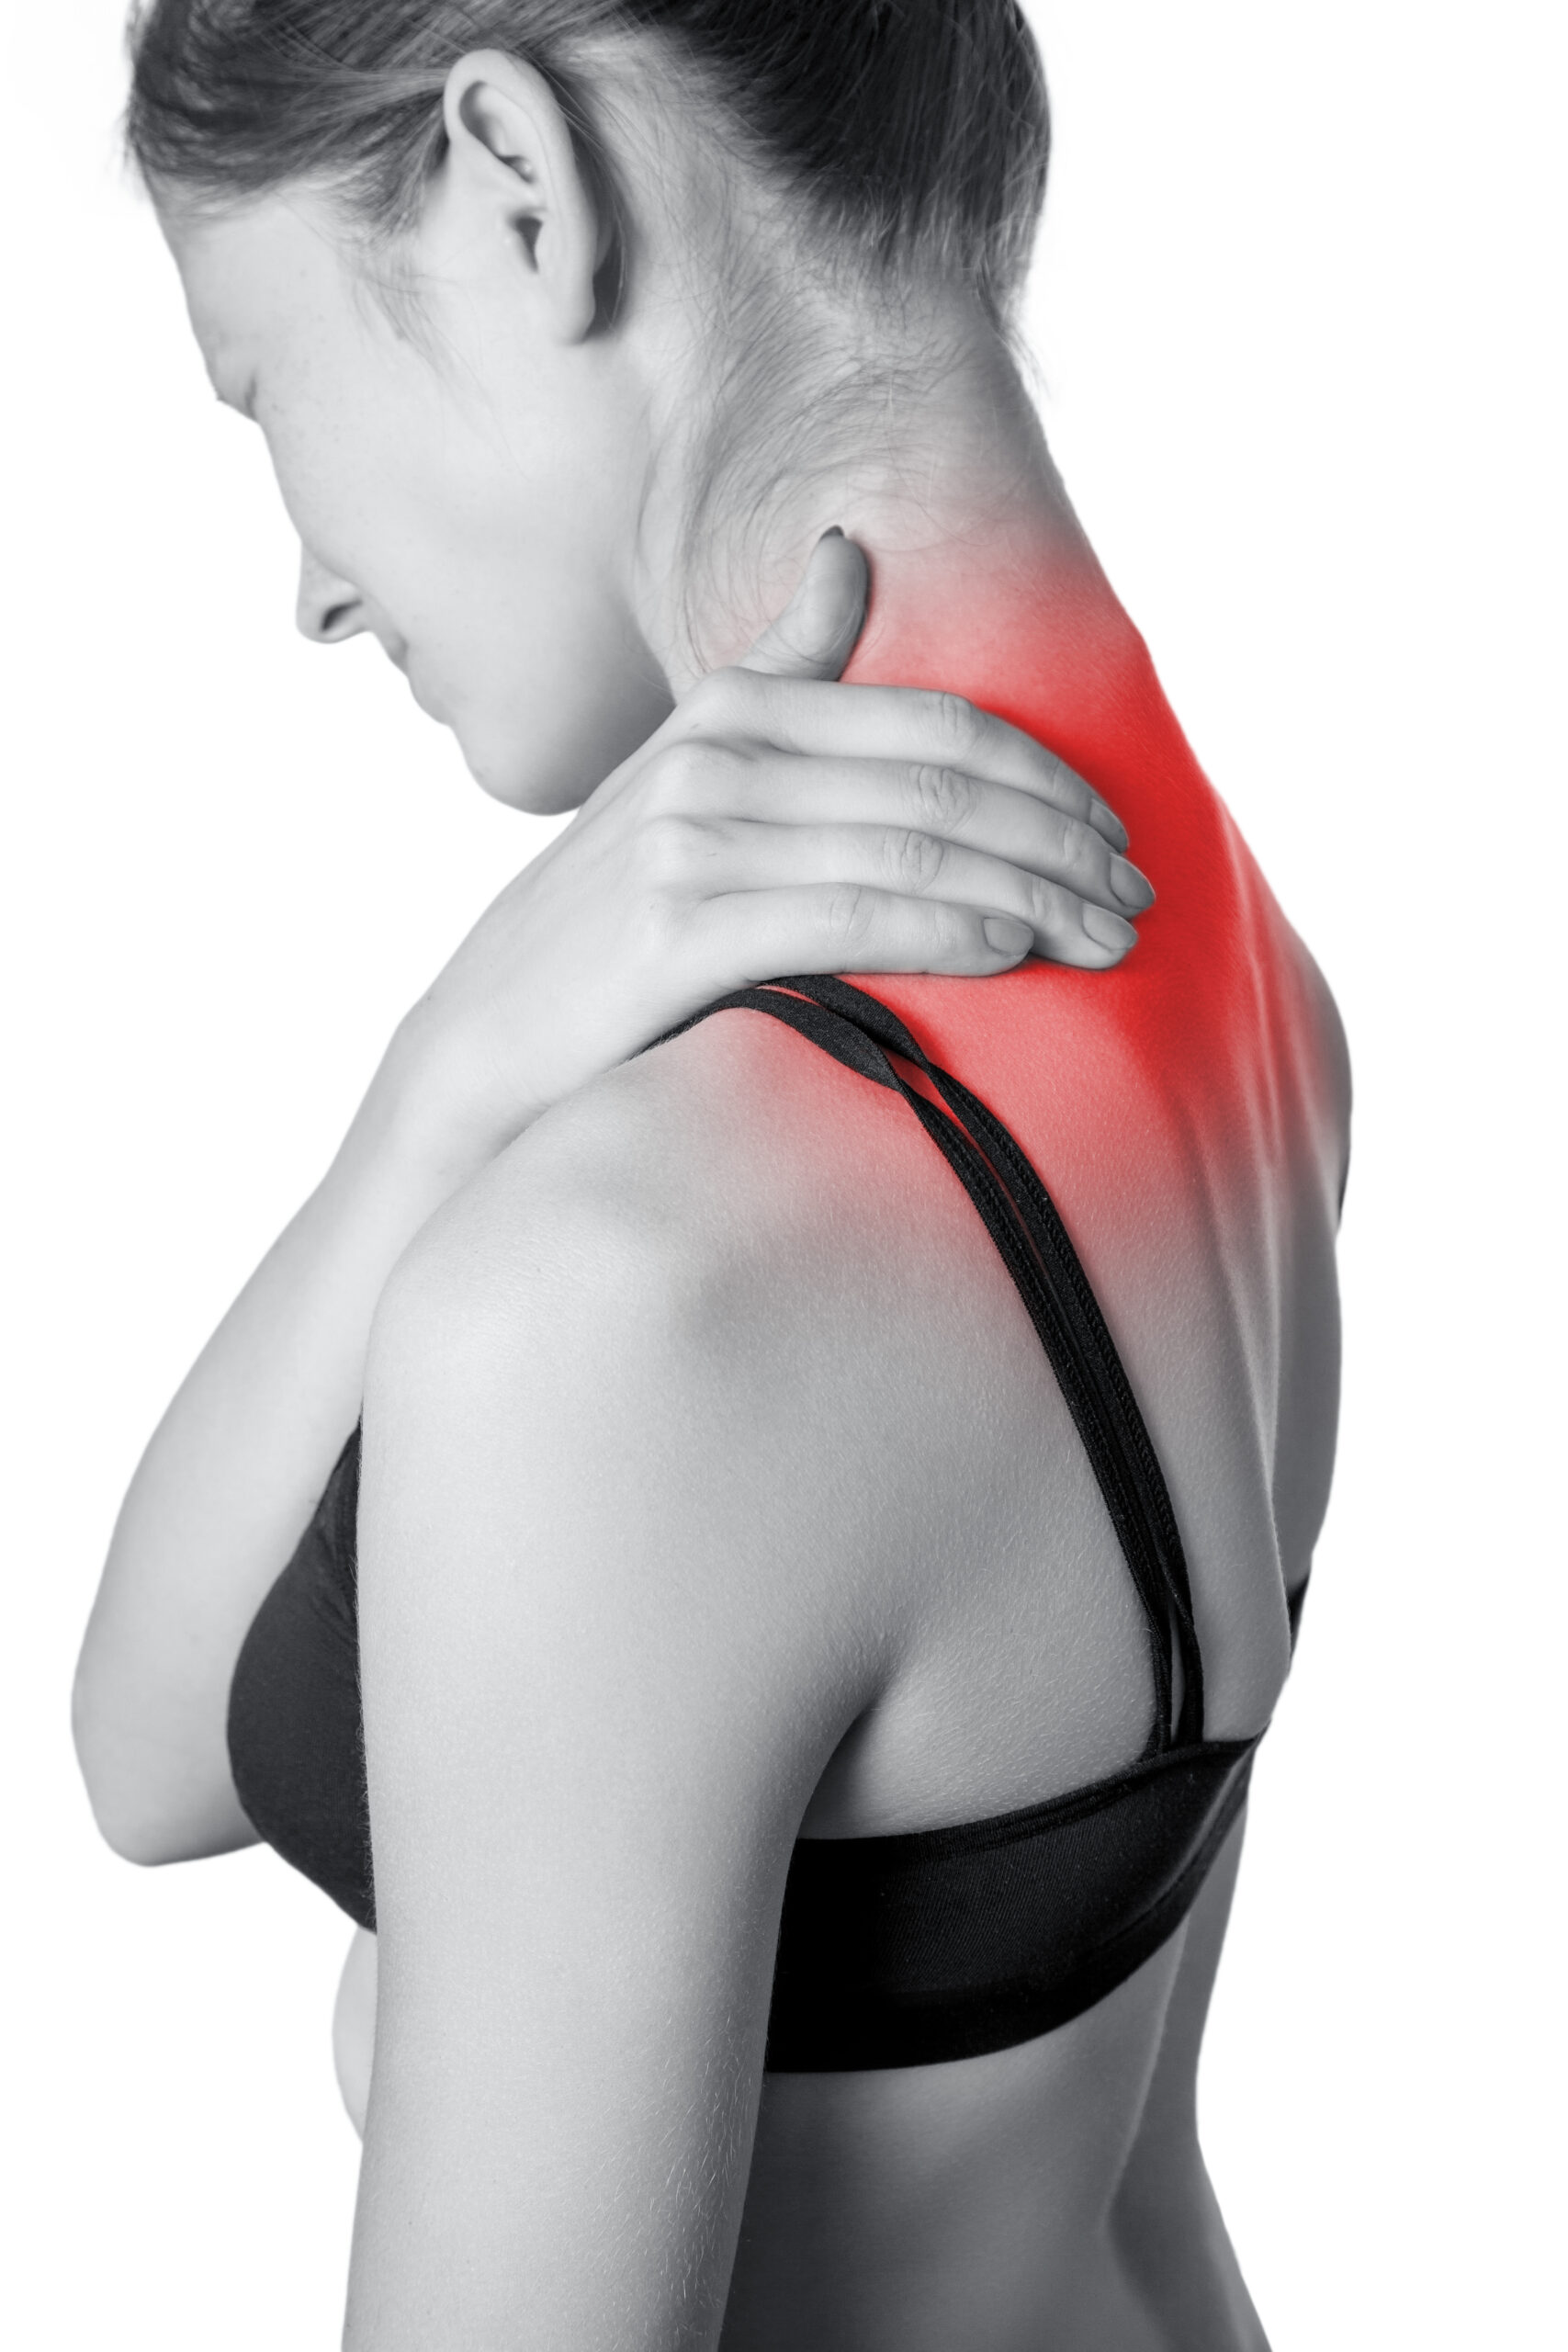 Women suffering from neck and shoulder pain.